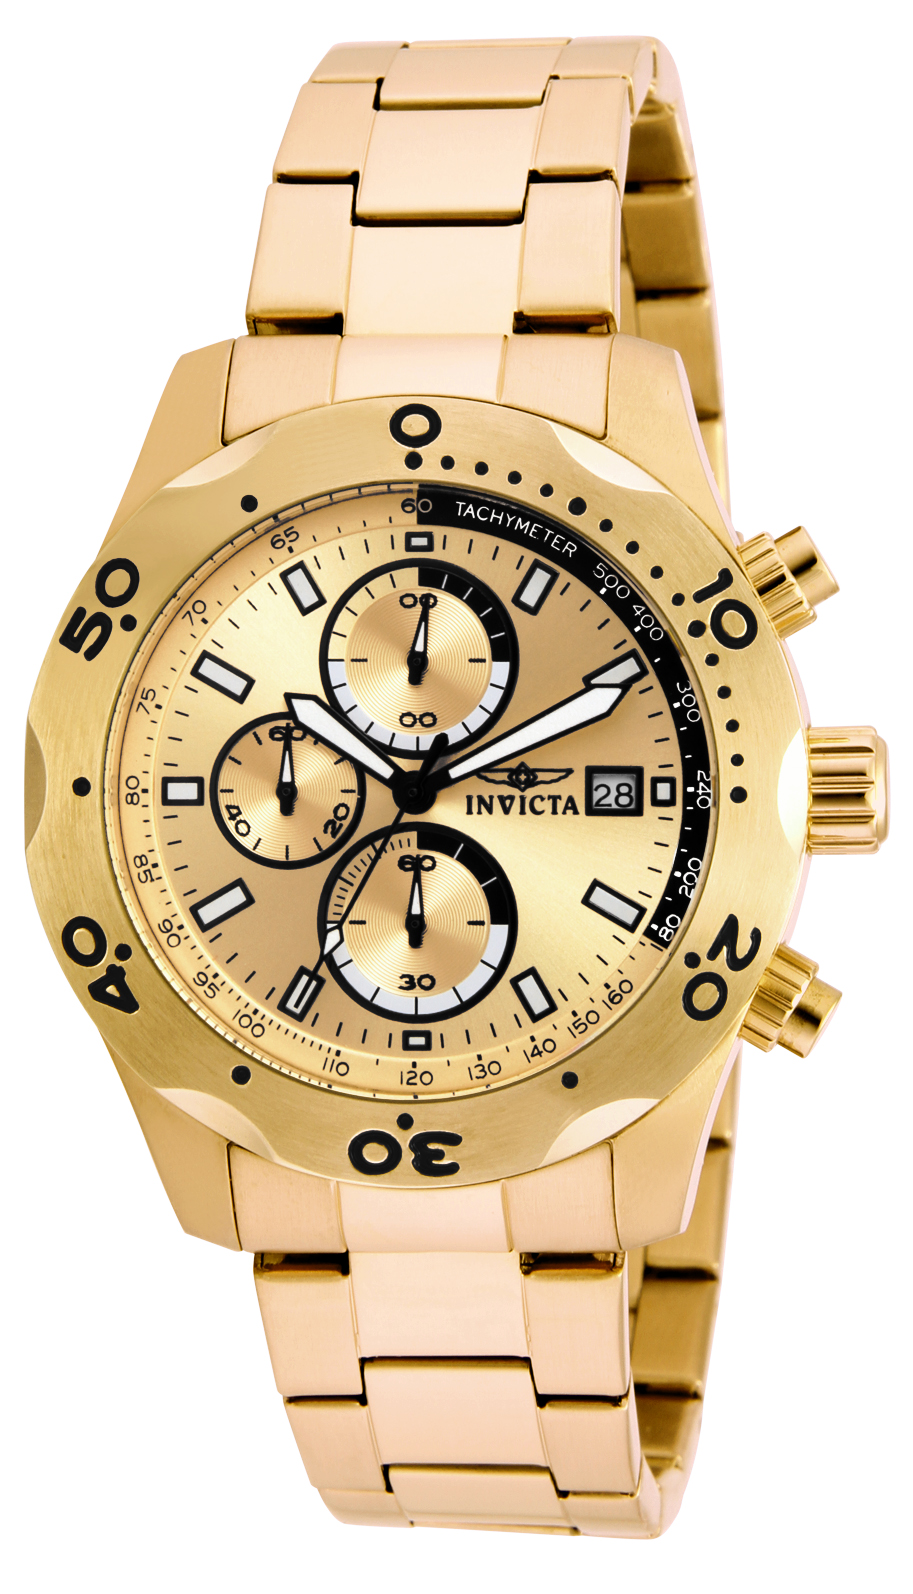 Invicta Specialty Men's Watch - 45mm, Gold (17750)